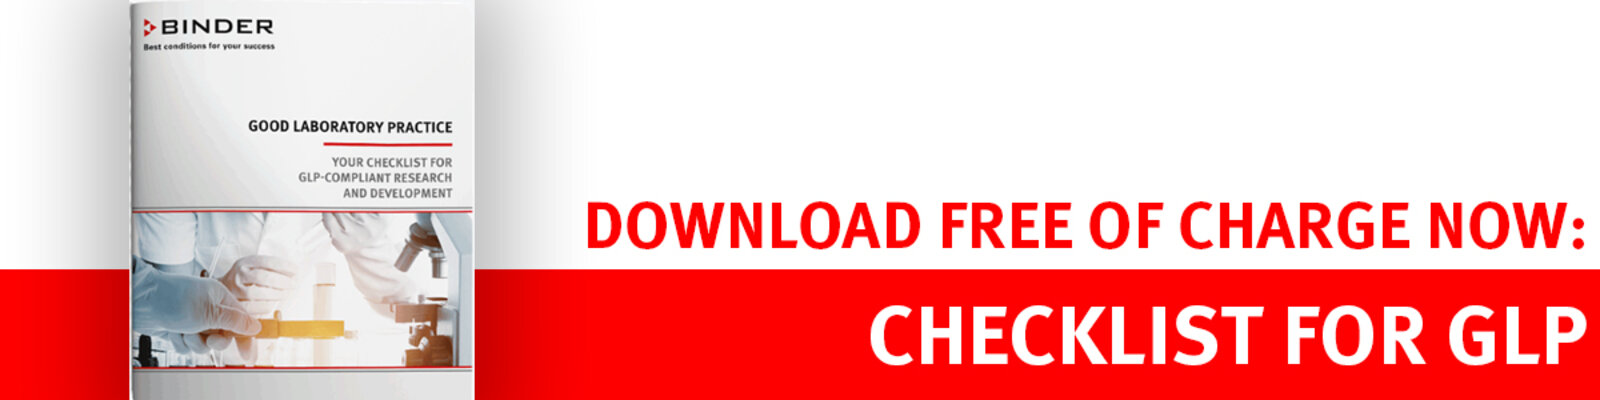 Download free of charge now - Checklist for GL